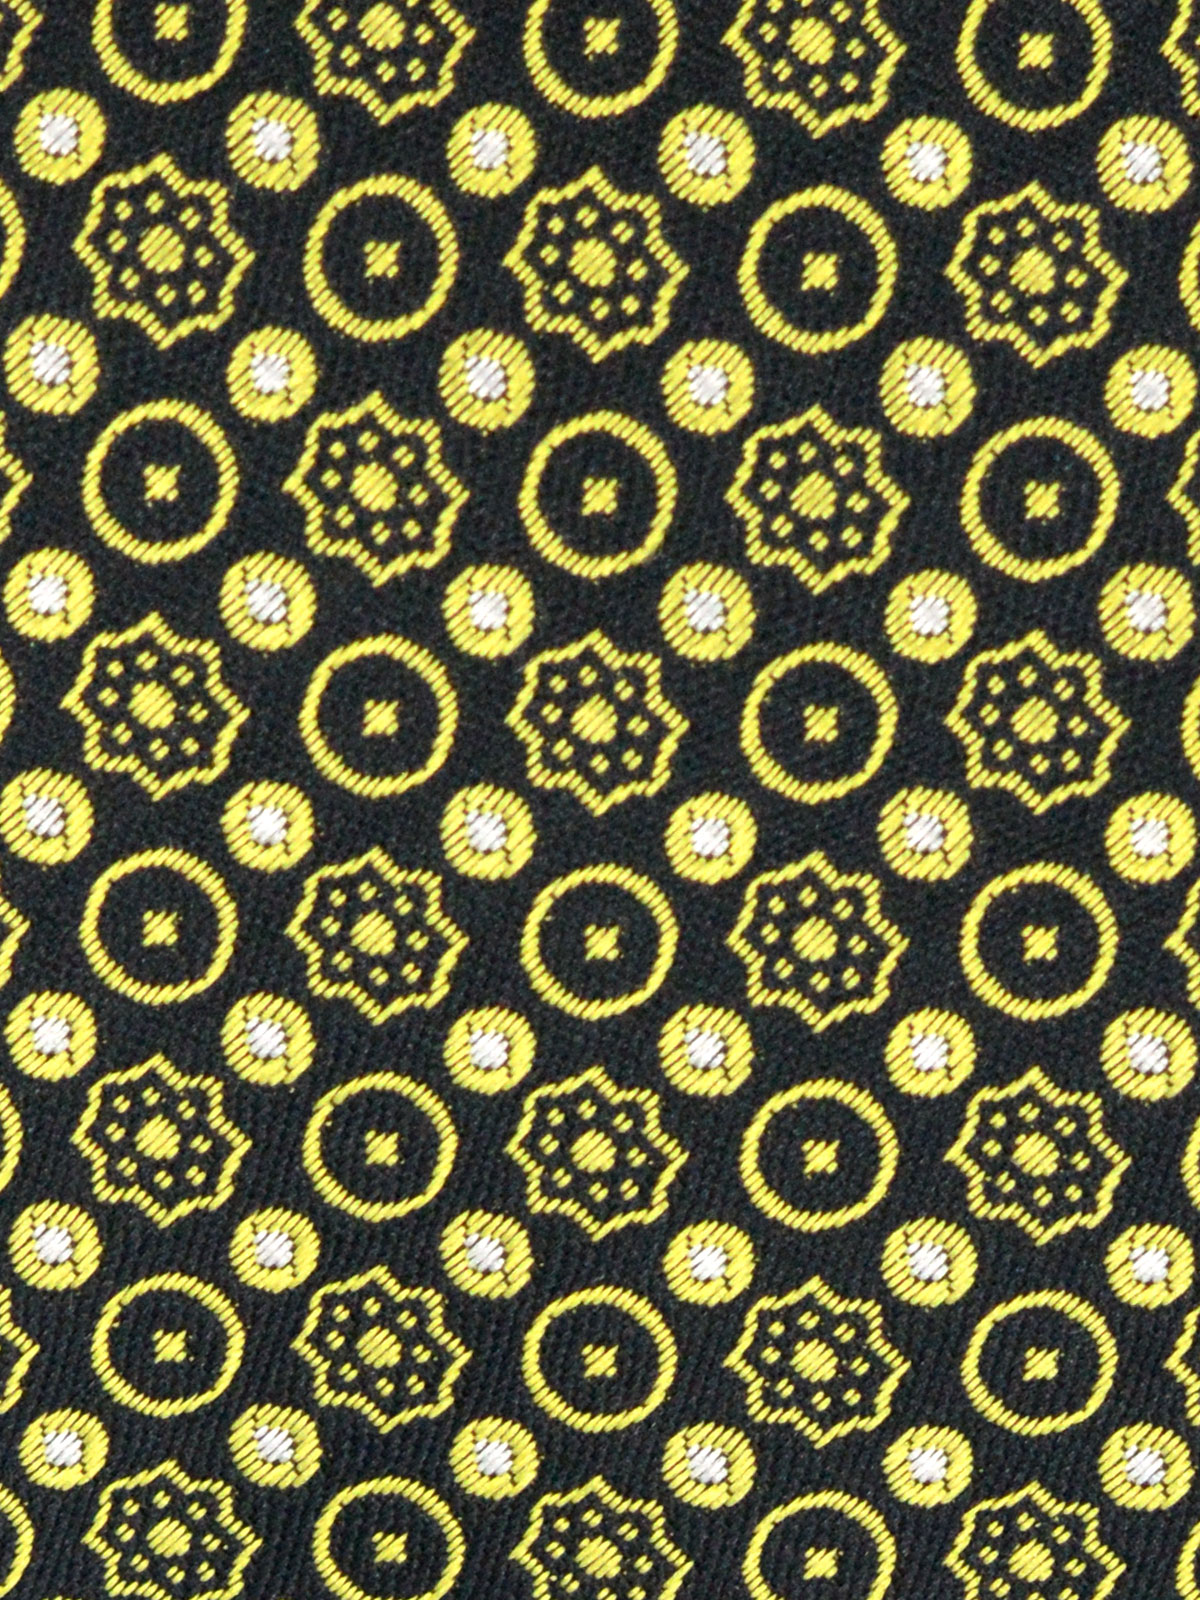  tie in black with yellow flowers and do - 10147 - € 14.06 img2